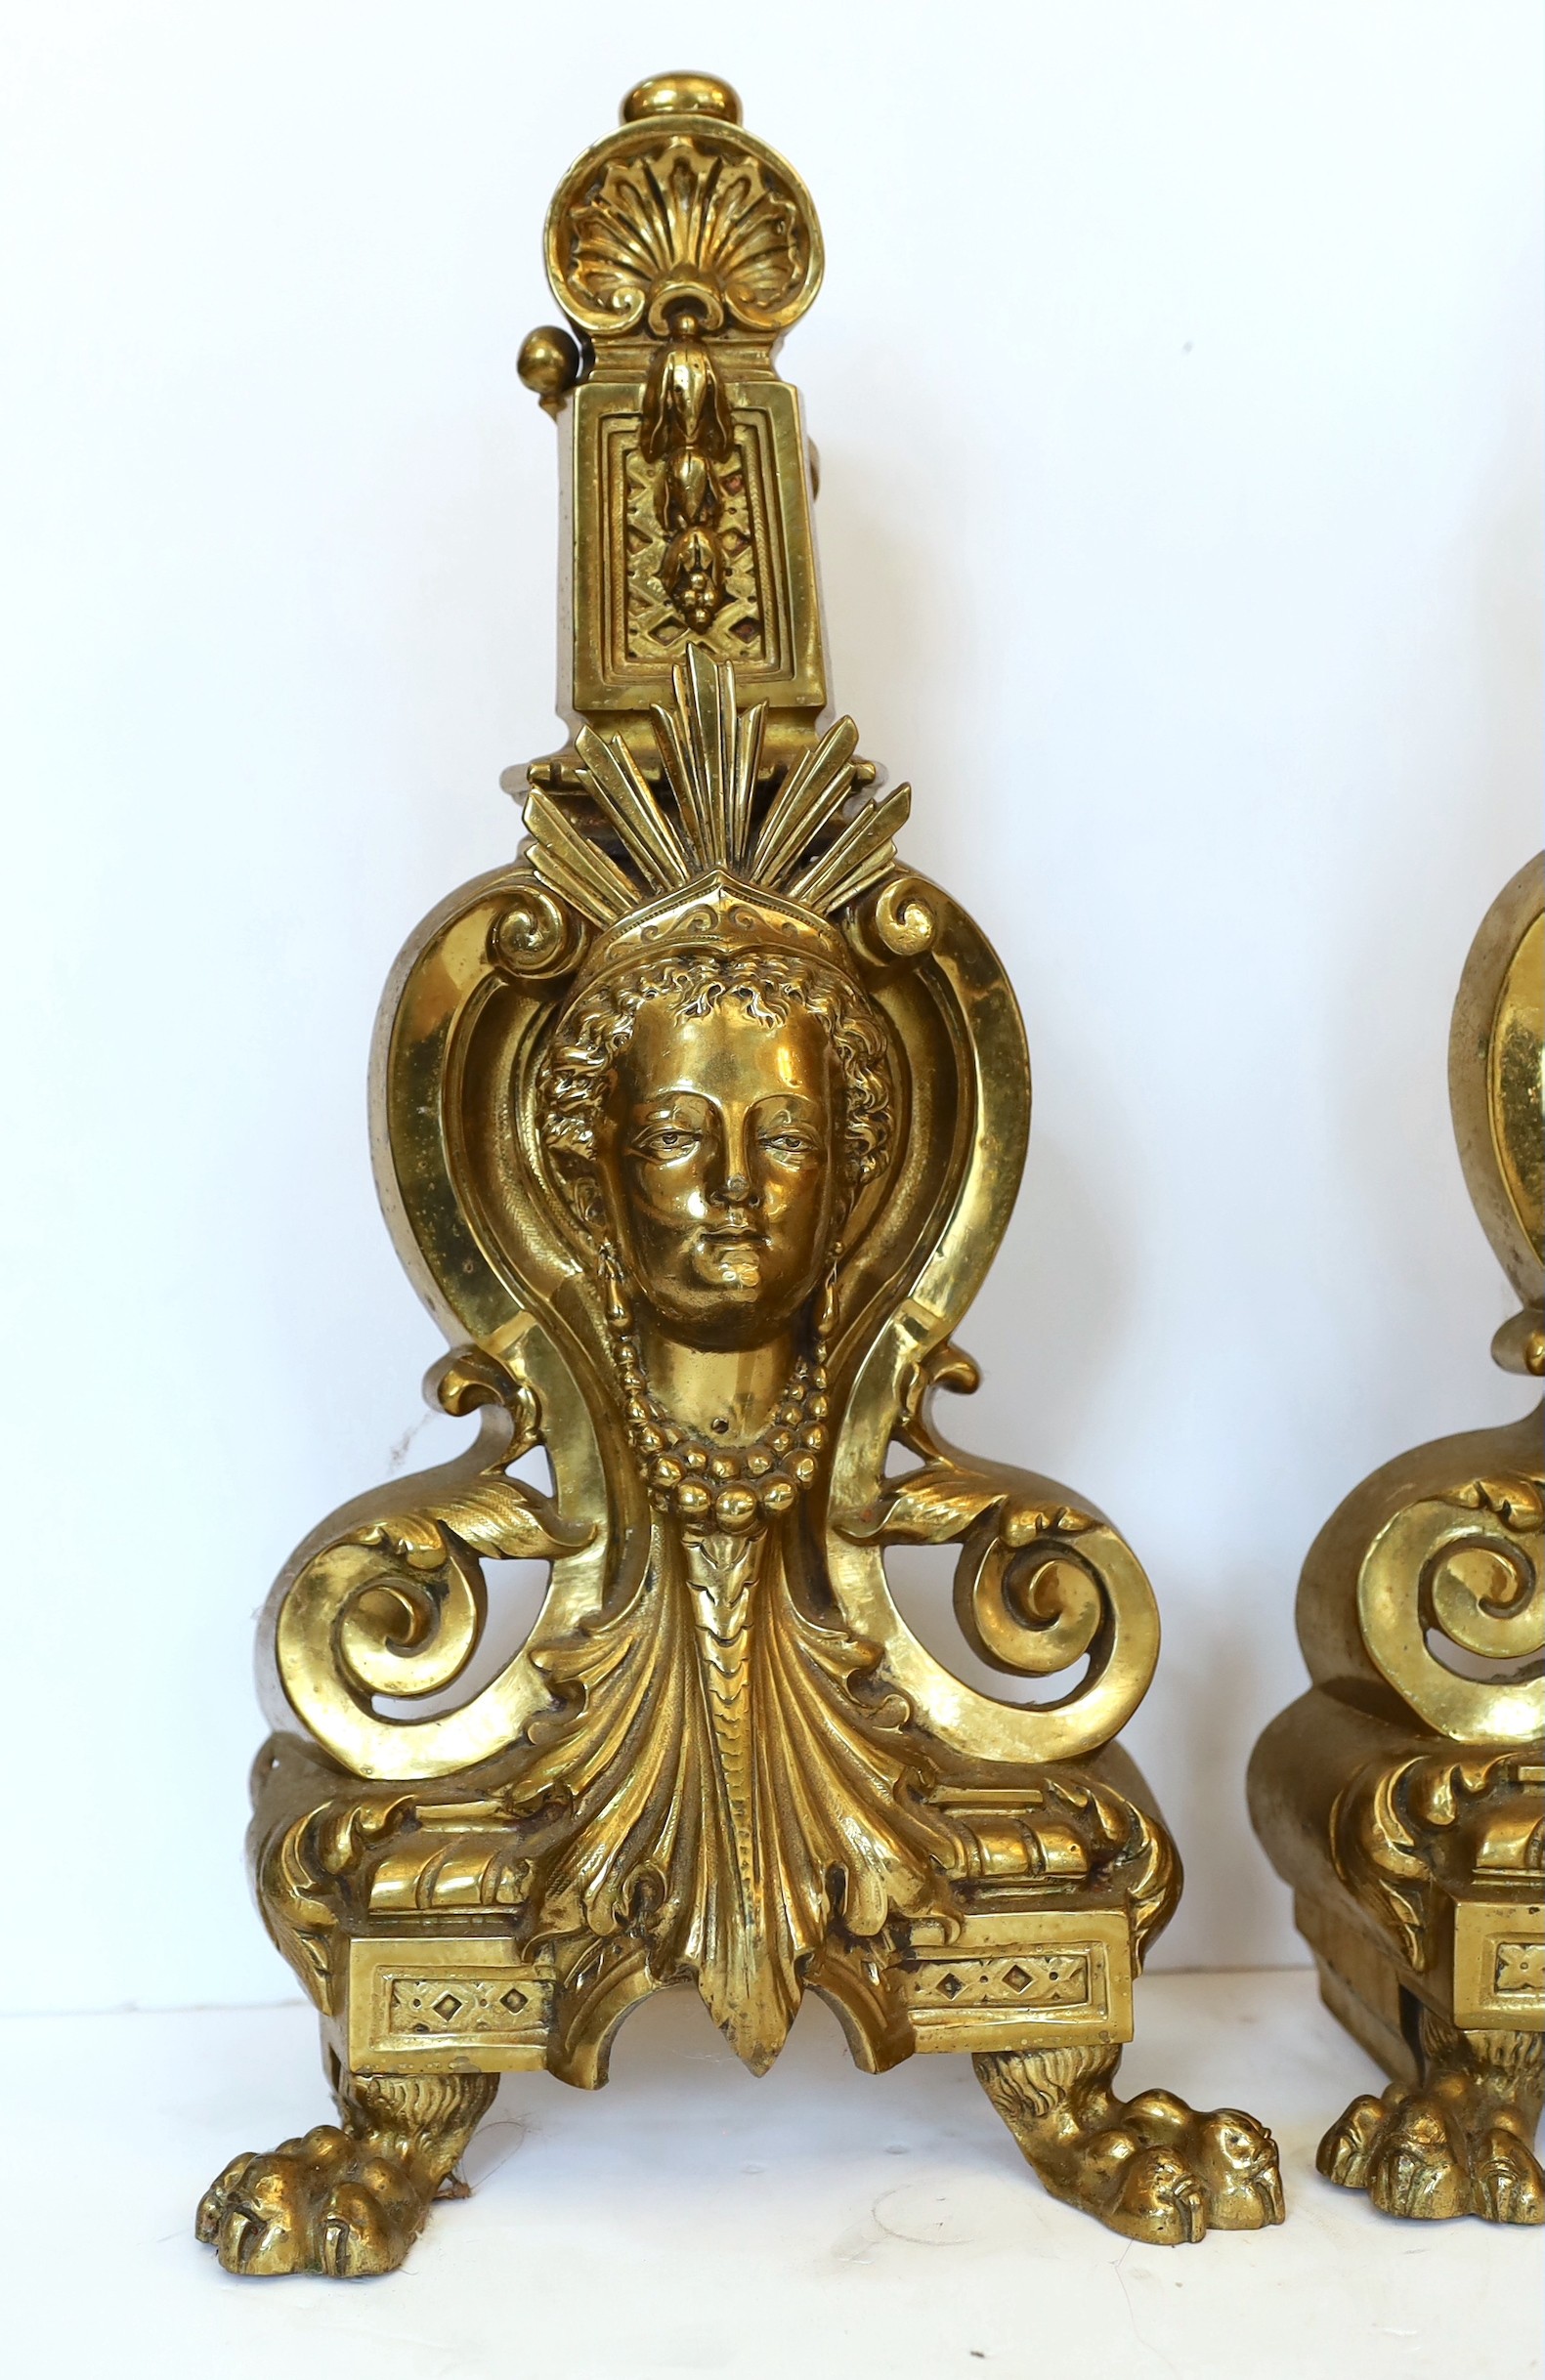 A pair of Louis XVI style gilt brass chenets, height 43cm